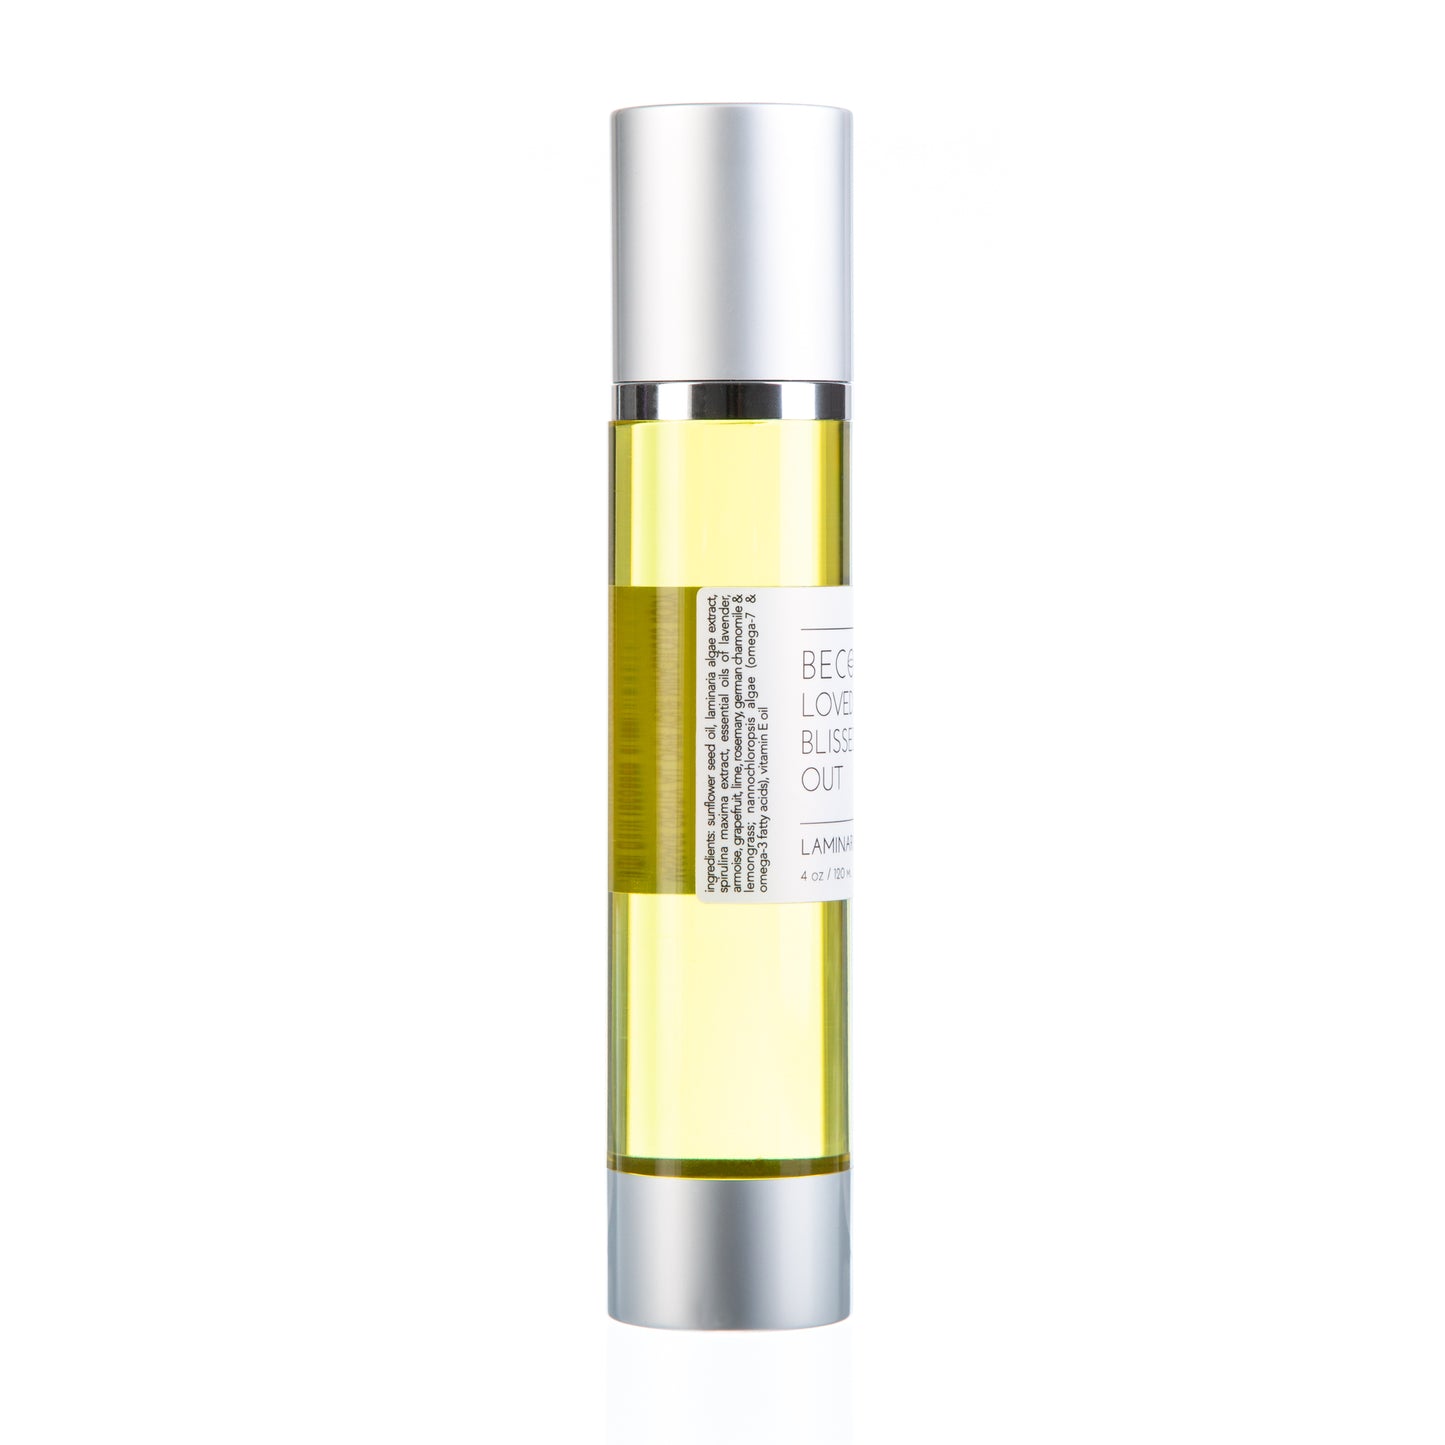 
                  
                    BECOME LOVED UP+ BLISSED OUT Laminaria Body Oil 4 oz
                  
                